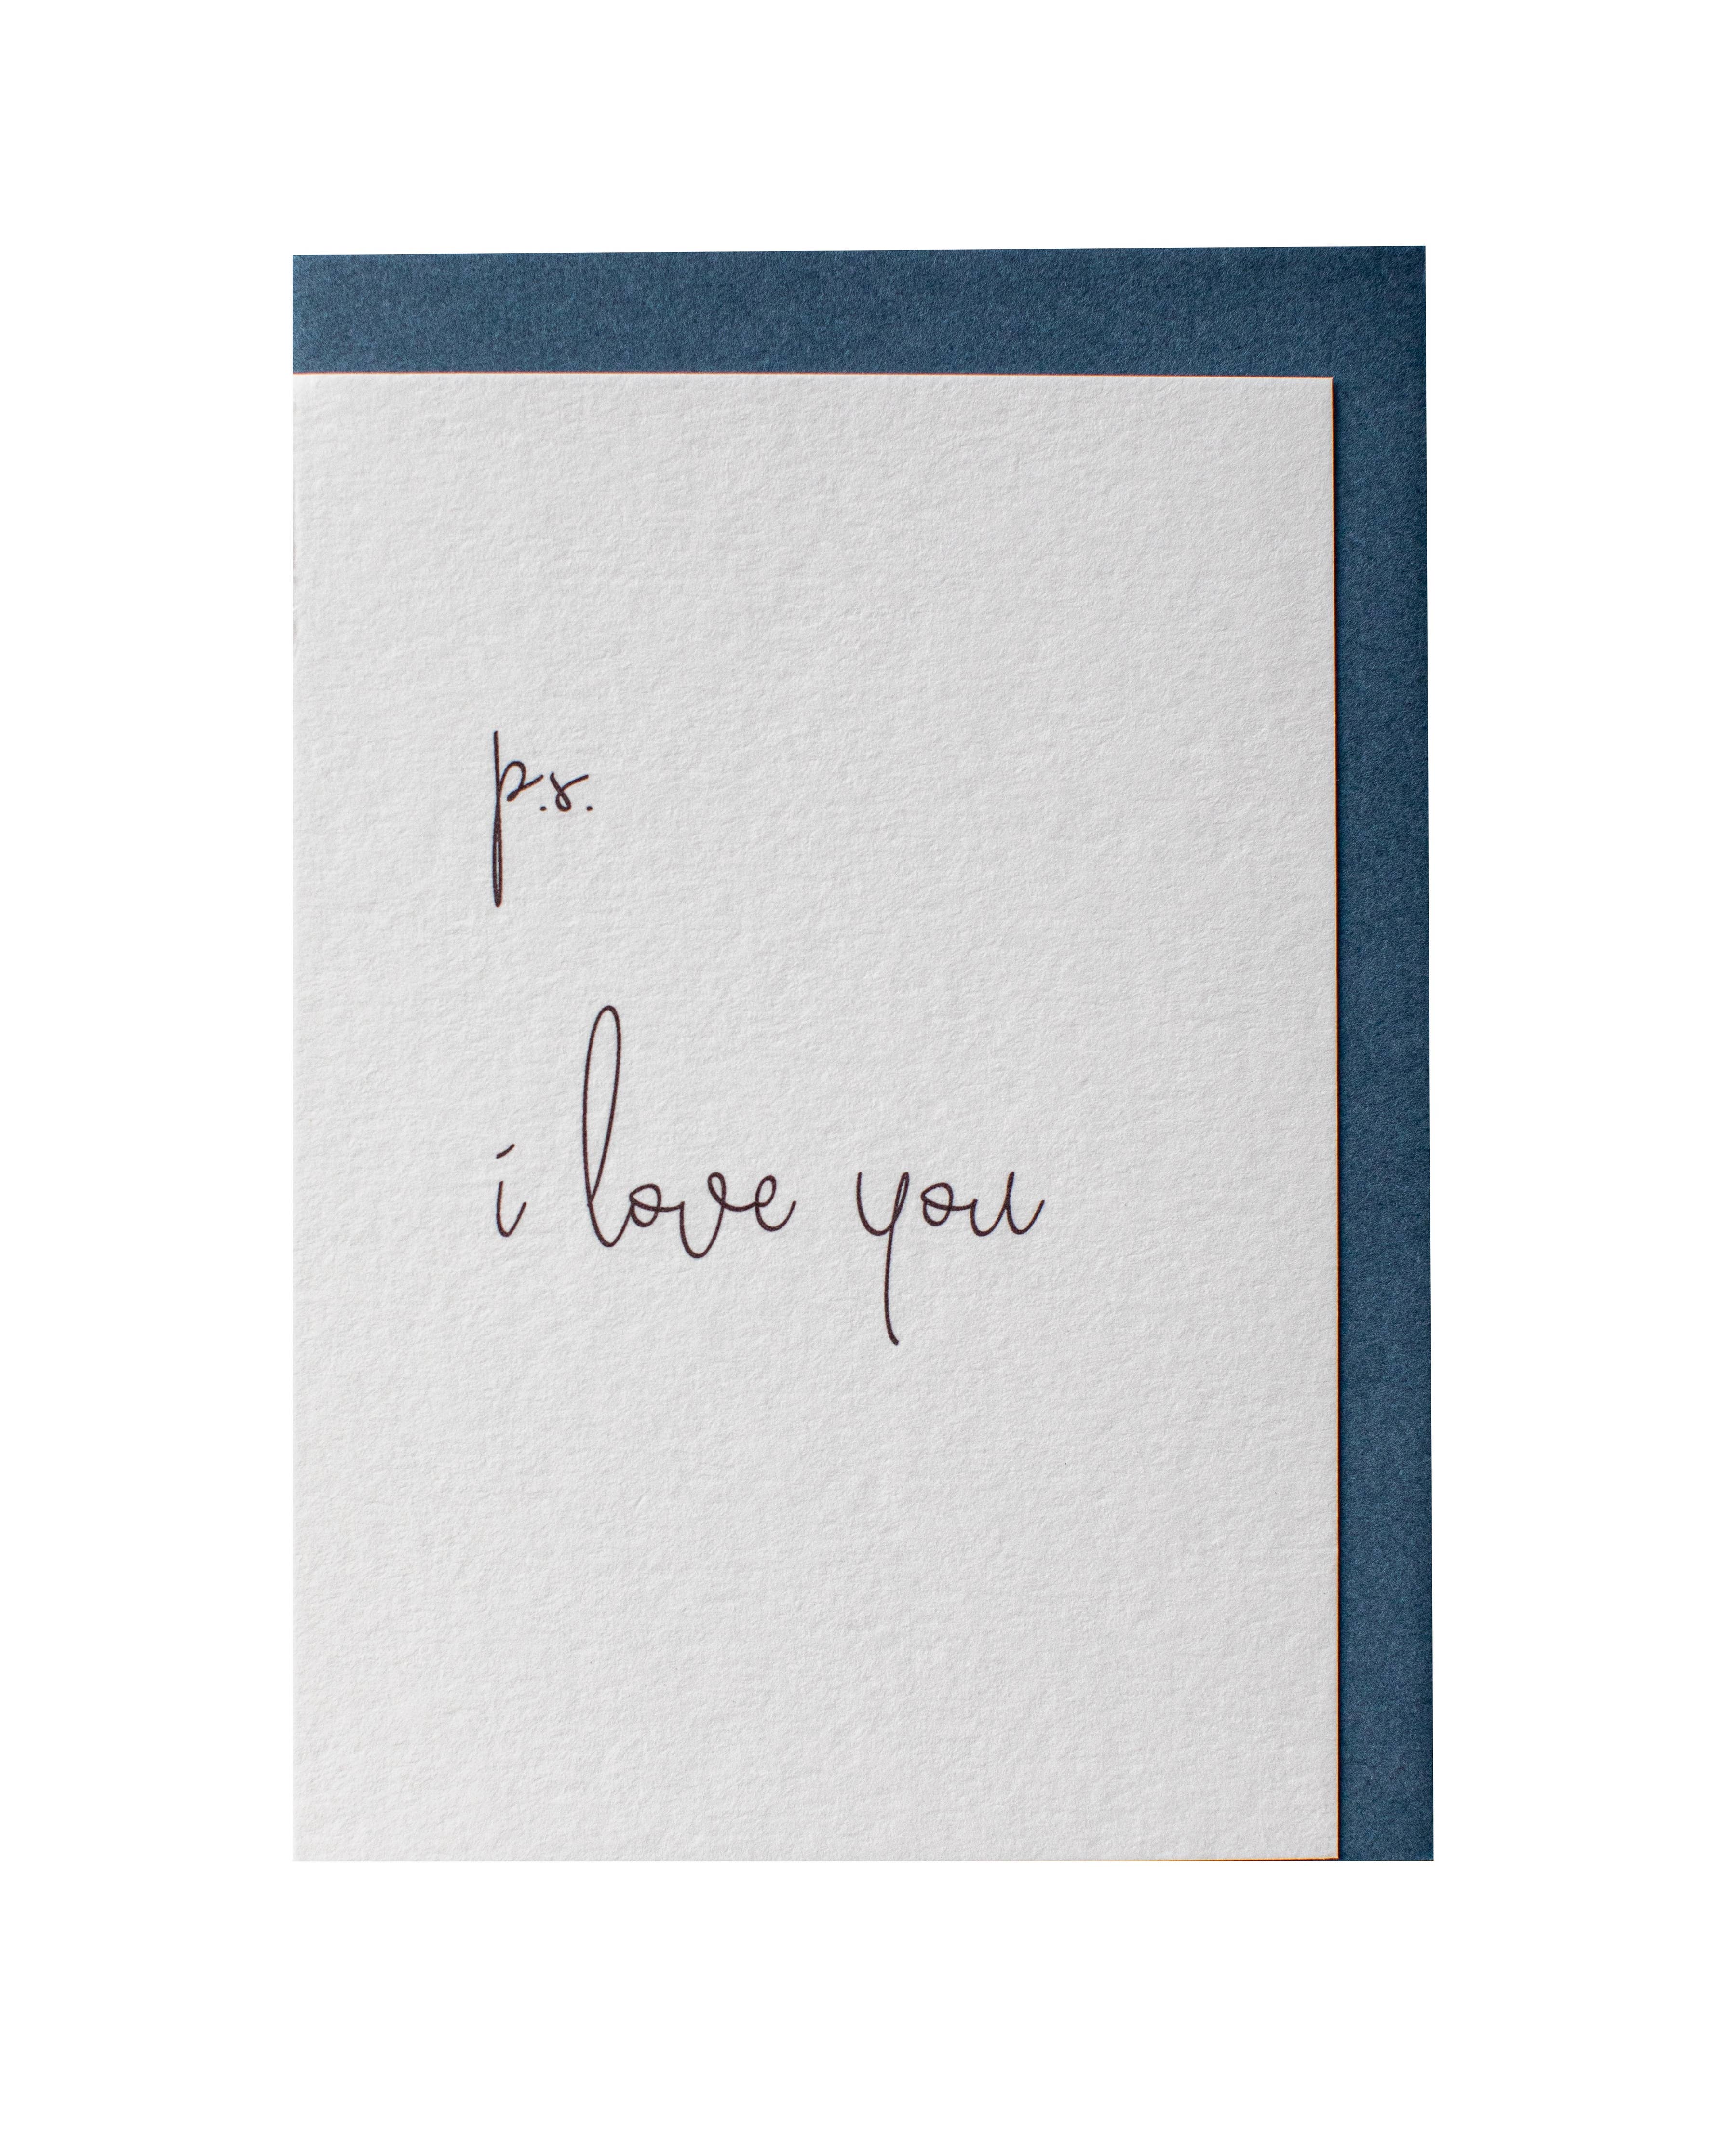 Greeting Cards - Assorted Designs Ps I Love You by Clare Bernadette